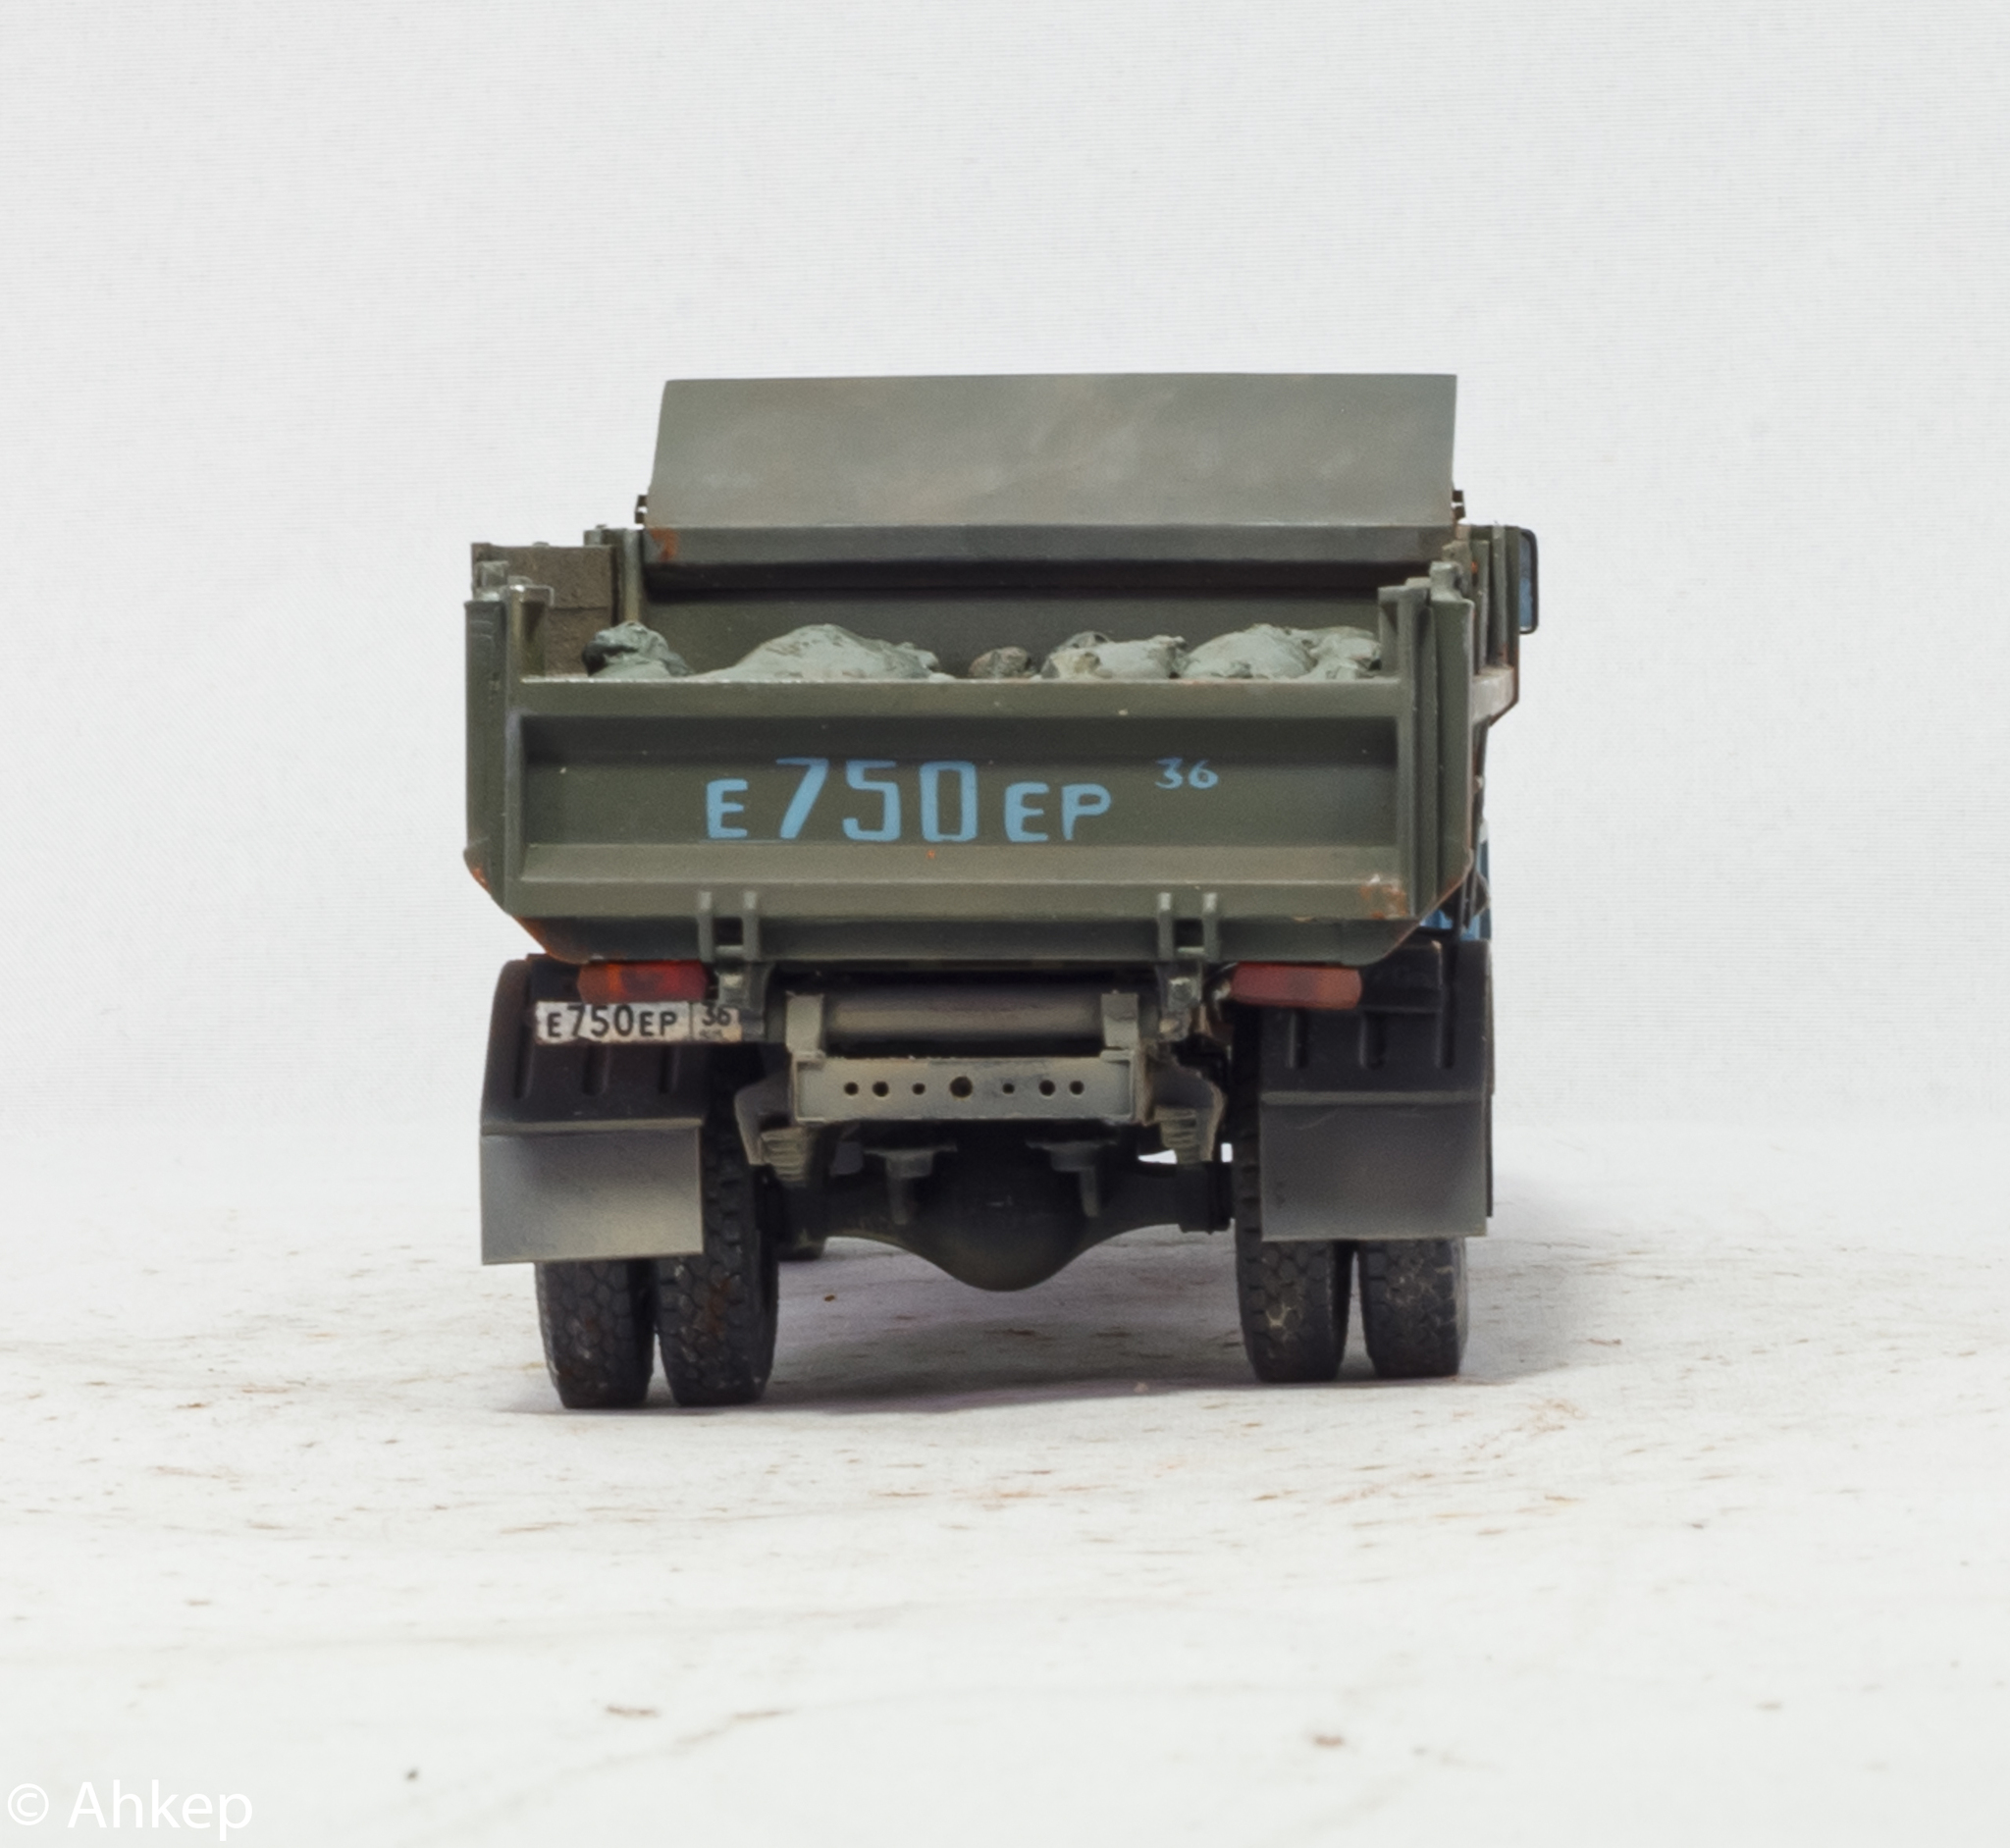 ZIL-UAMZ-4505. - My, Modeling, Scale model, Stand modeling, Painting miniatures, Collecting, Miniature, Zil, Dump truck, Truck, Longpost, Collection